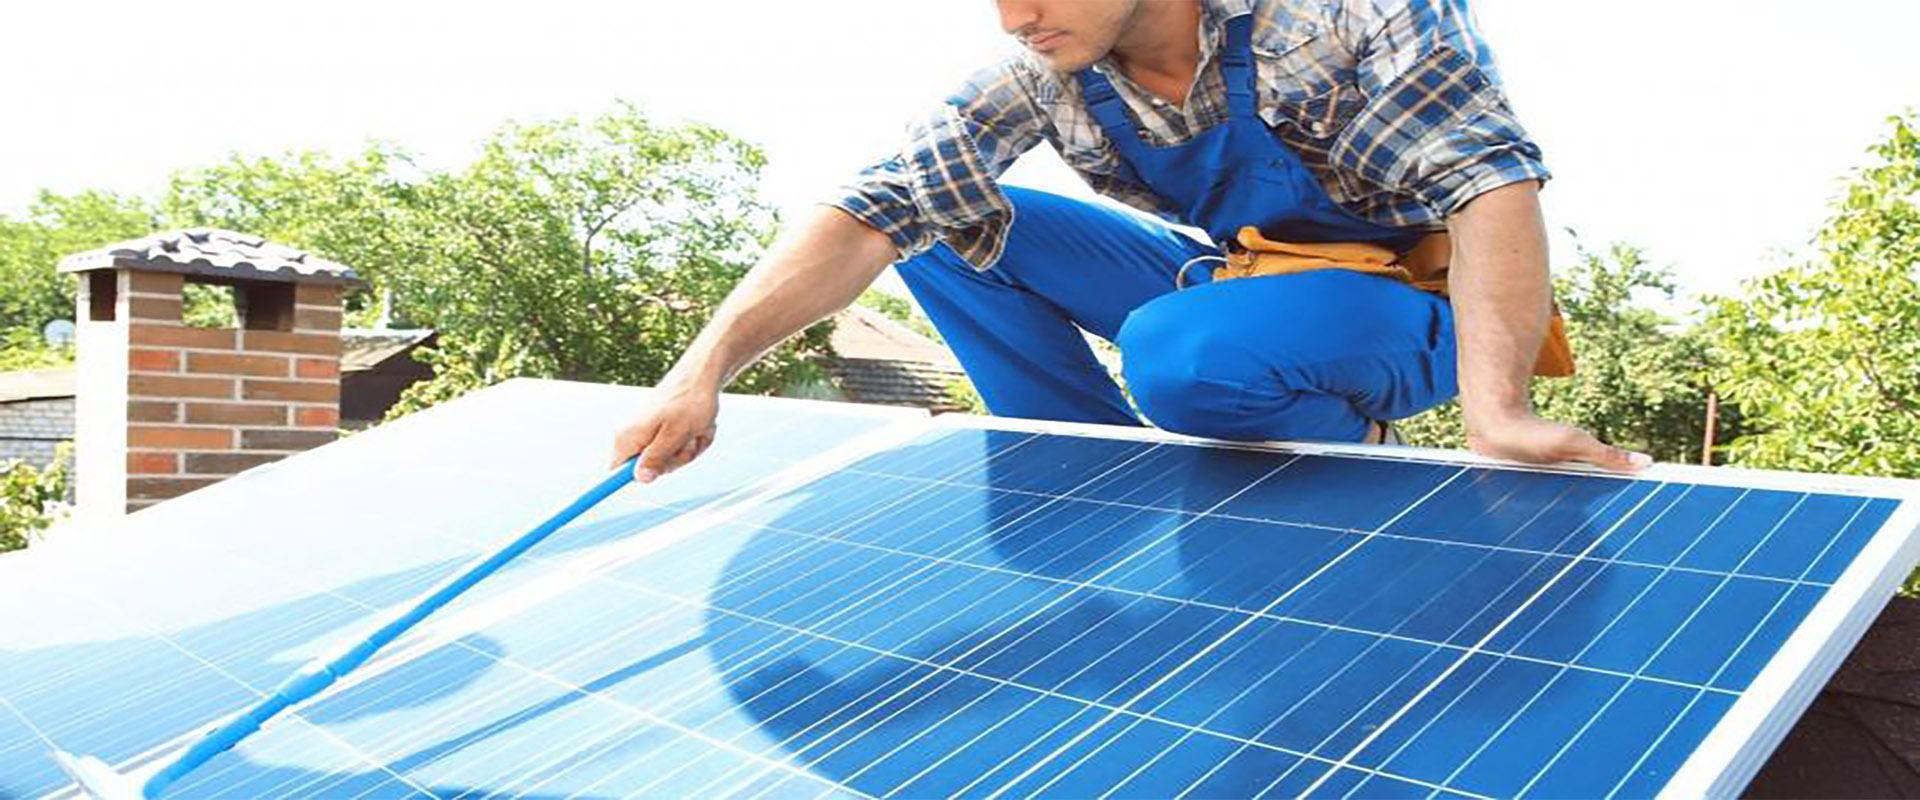 Why Should You Clean Your Solar Panels? And How To Clean?